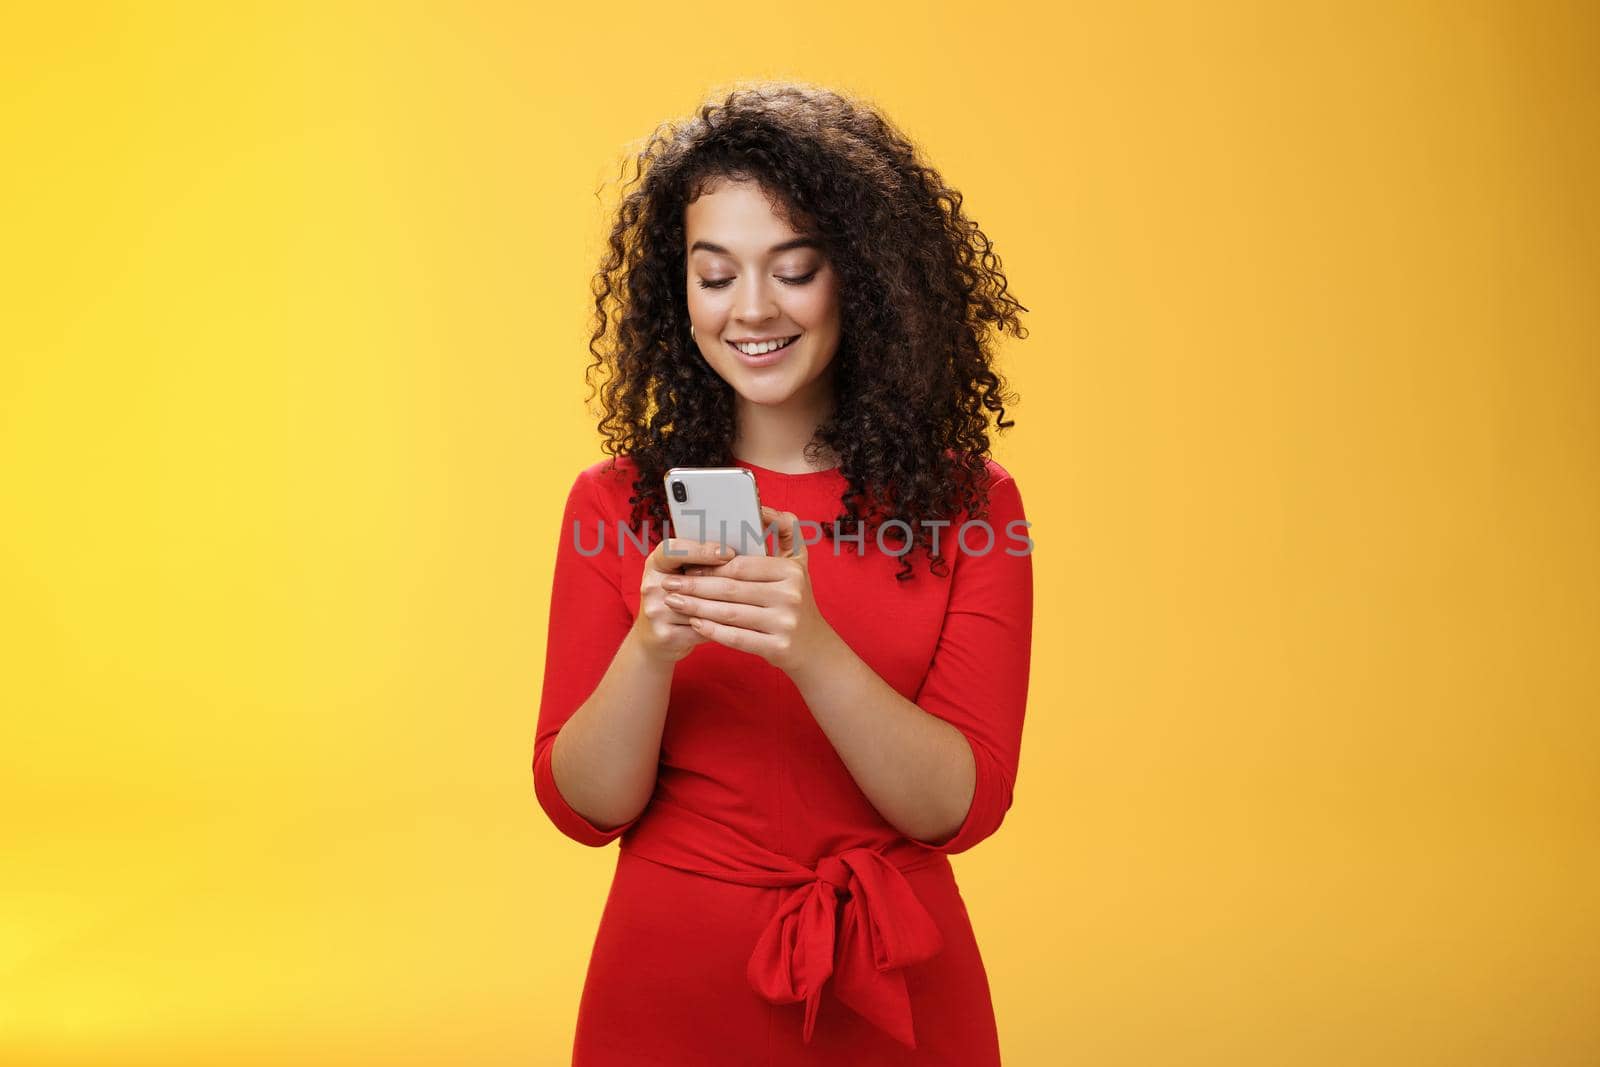 Gil sending message spread news across social network having party inviting friends via smartphone holding mobile phone in hands smiling broadly at device screen as posing over yellow background by Benzoix